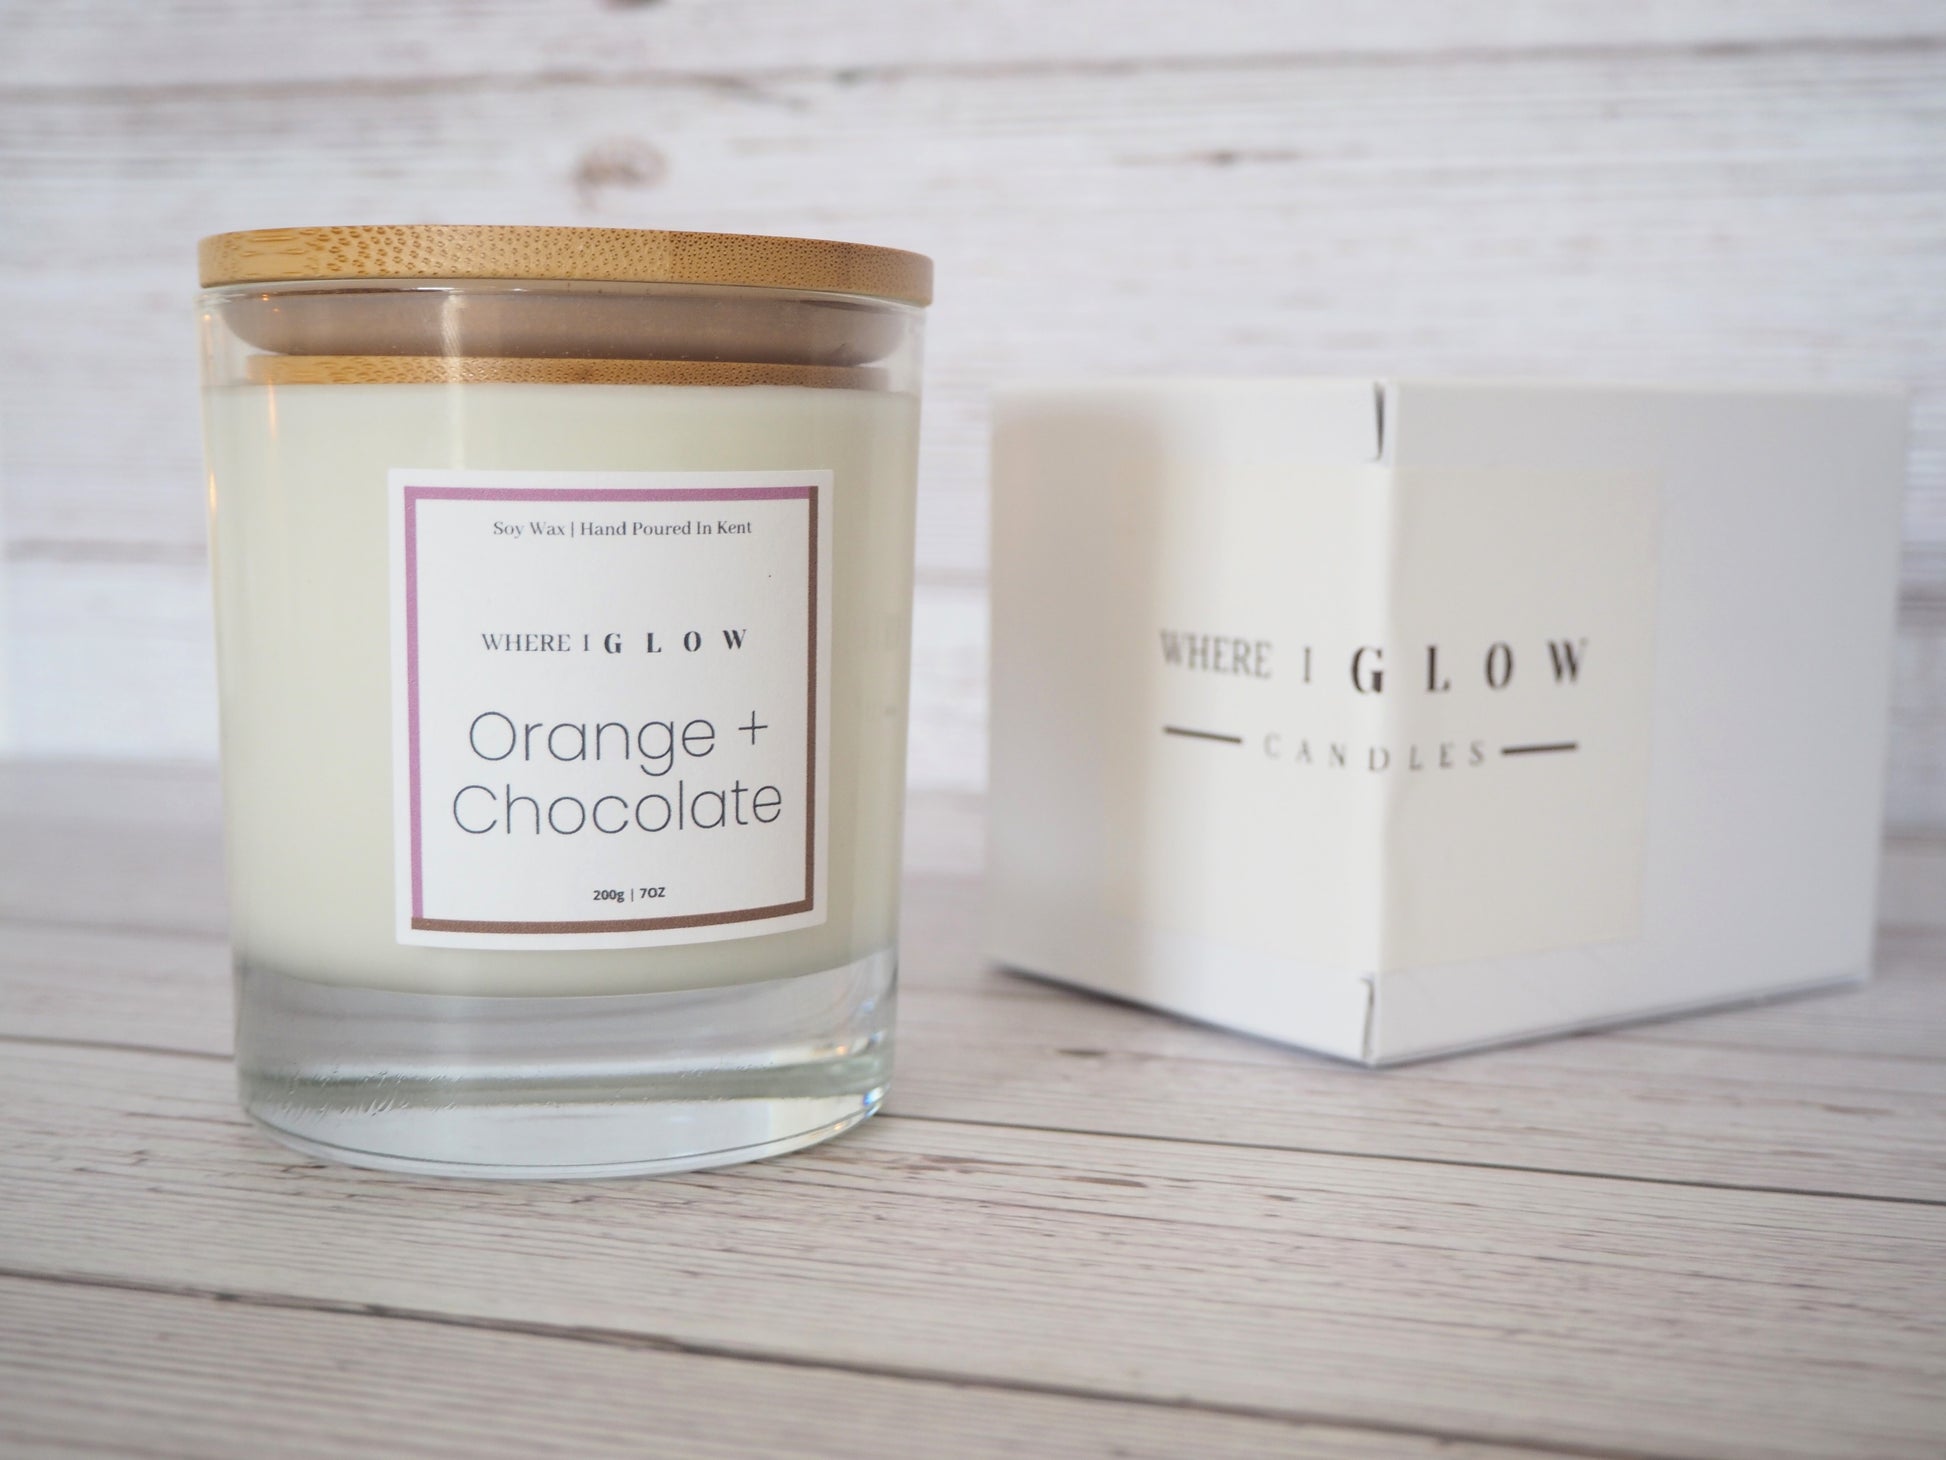 Orange and Chocolate Sweet Soy Candle 7oz by Where I Glow